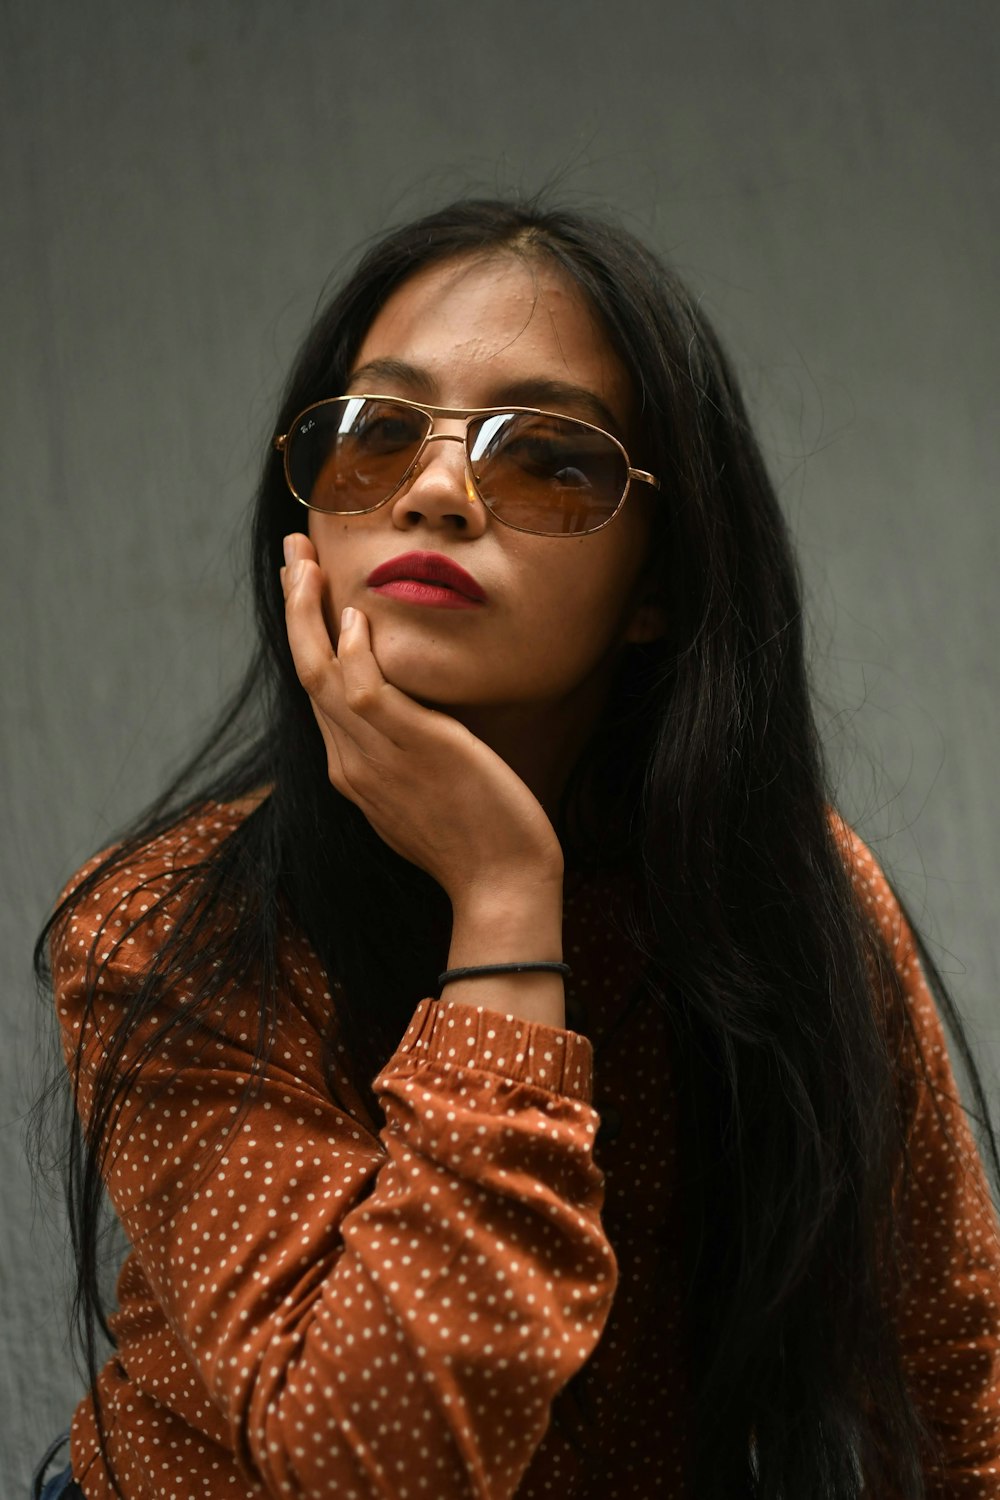 a woman in a polka dot shirt and sunglasses